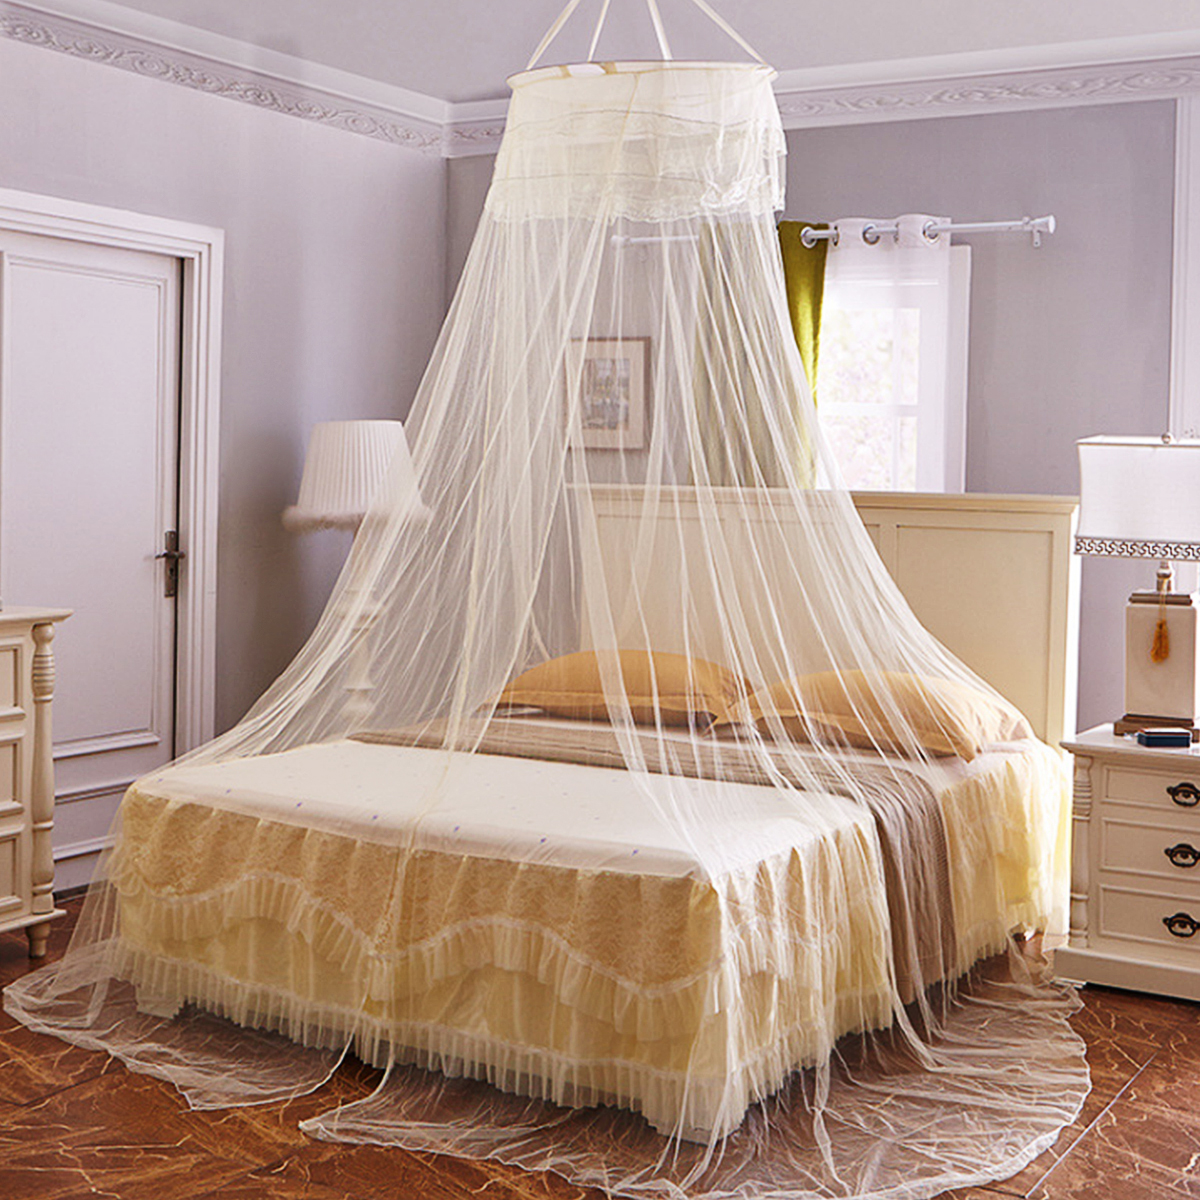 Anti-Mosquito-Round-Ceiling-Mosquito-Net-Dense-And-High-Polyester-Mesh-No-Installation-Mosquito-Net-1866033-11